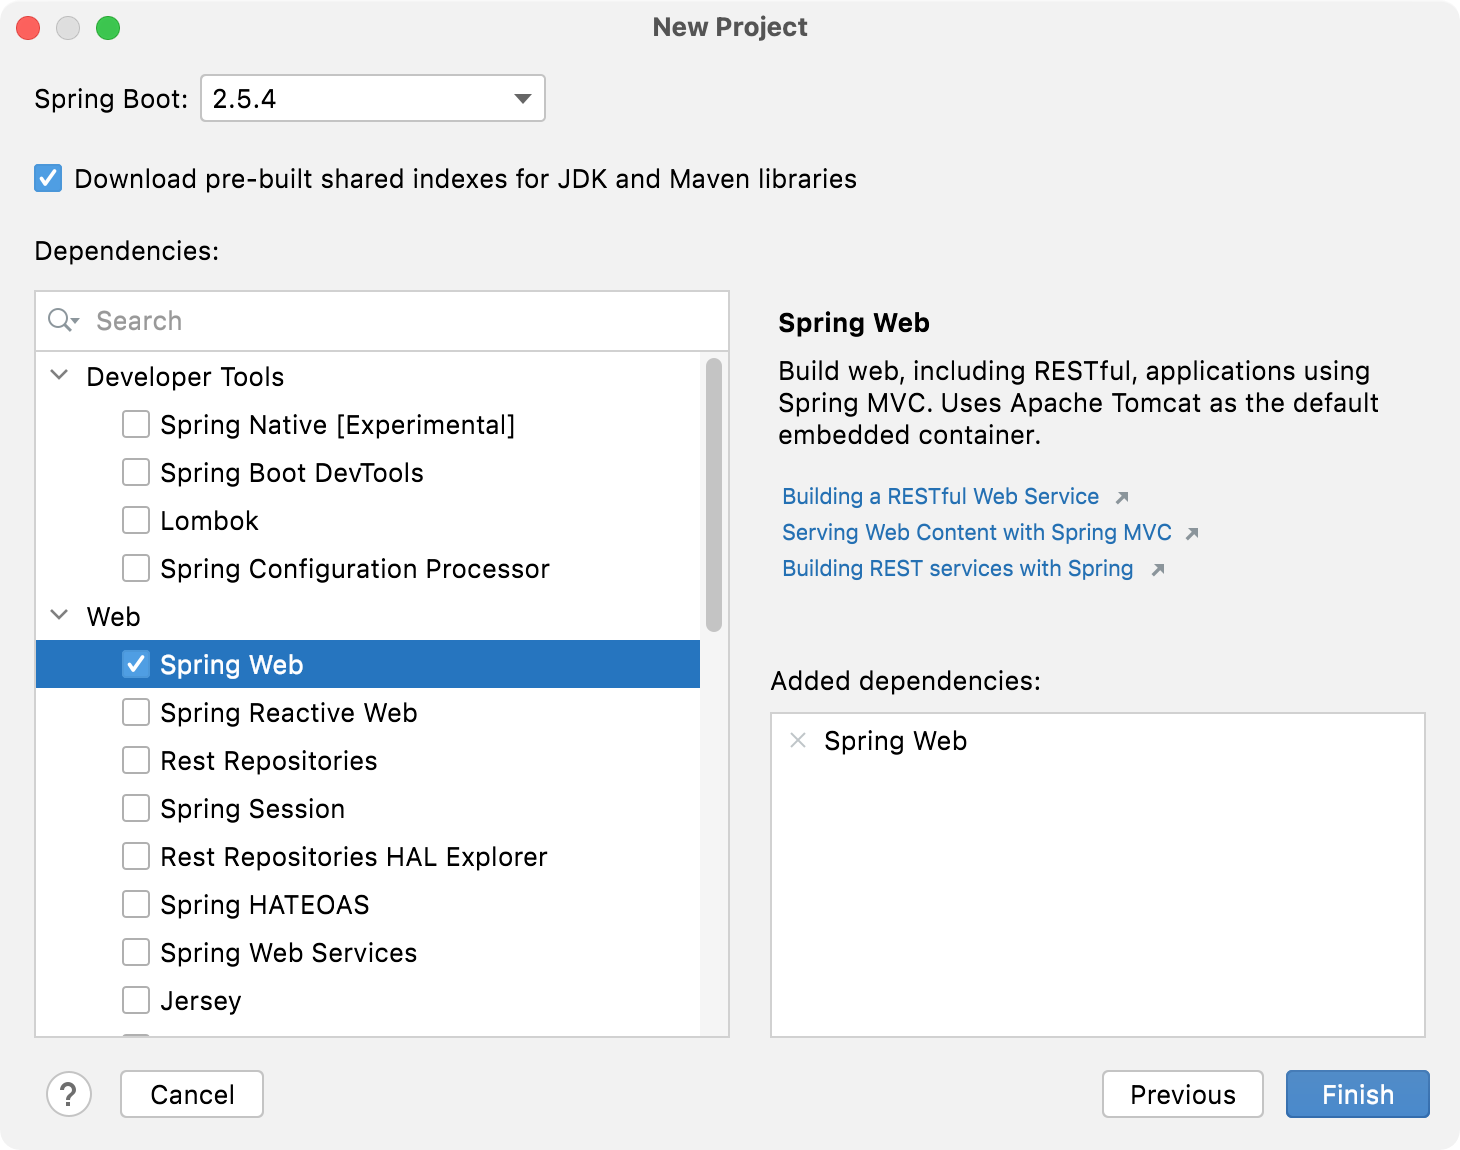 Spring Dependencies in the New Project wizard